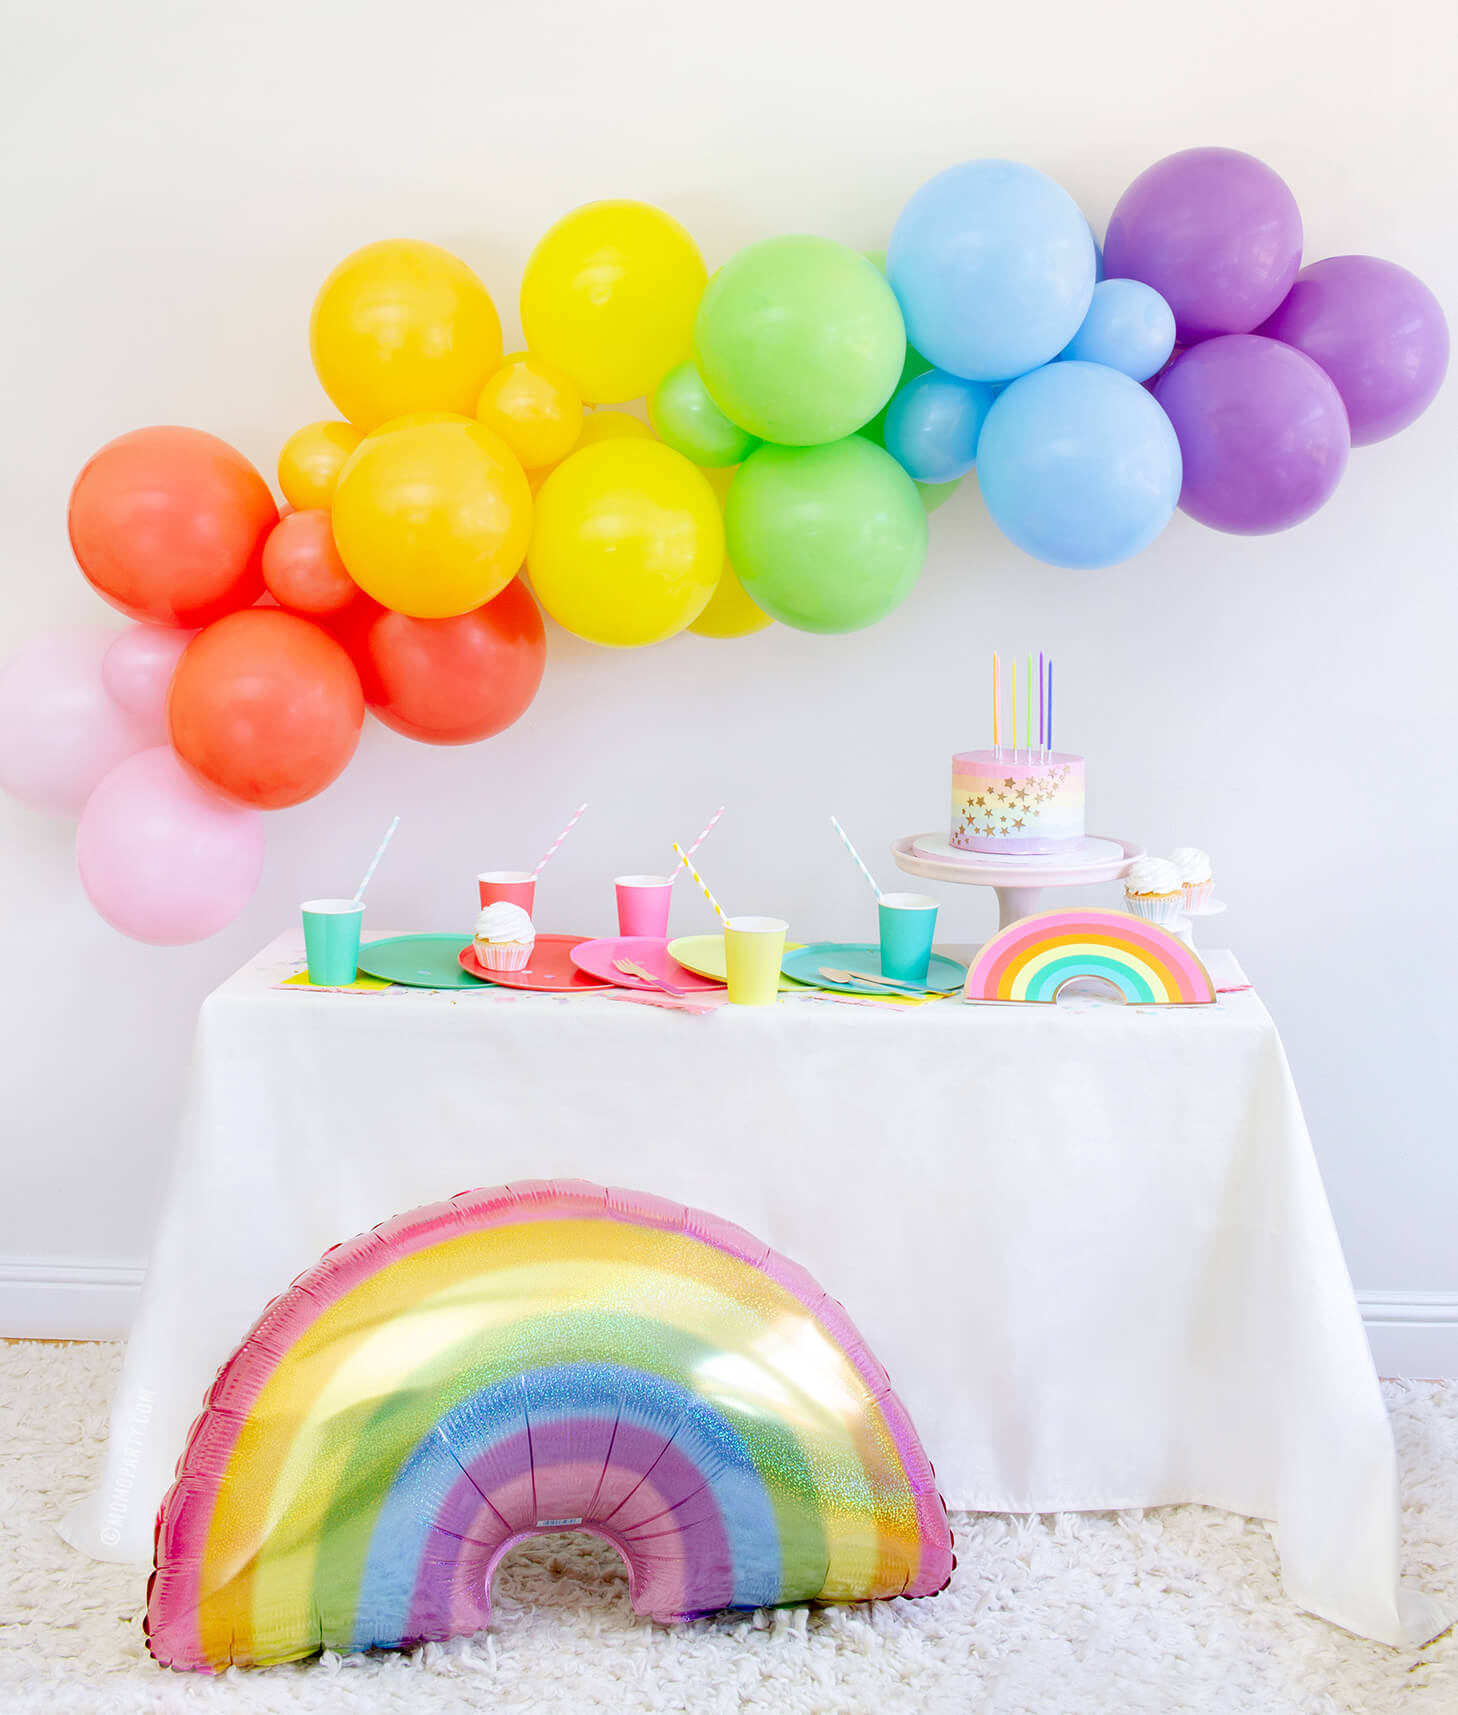 The Ultimate Rainbow Party Ideas Guide - 25 Rainbow Party Foods